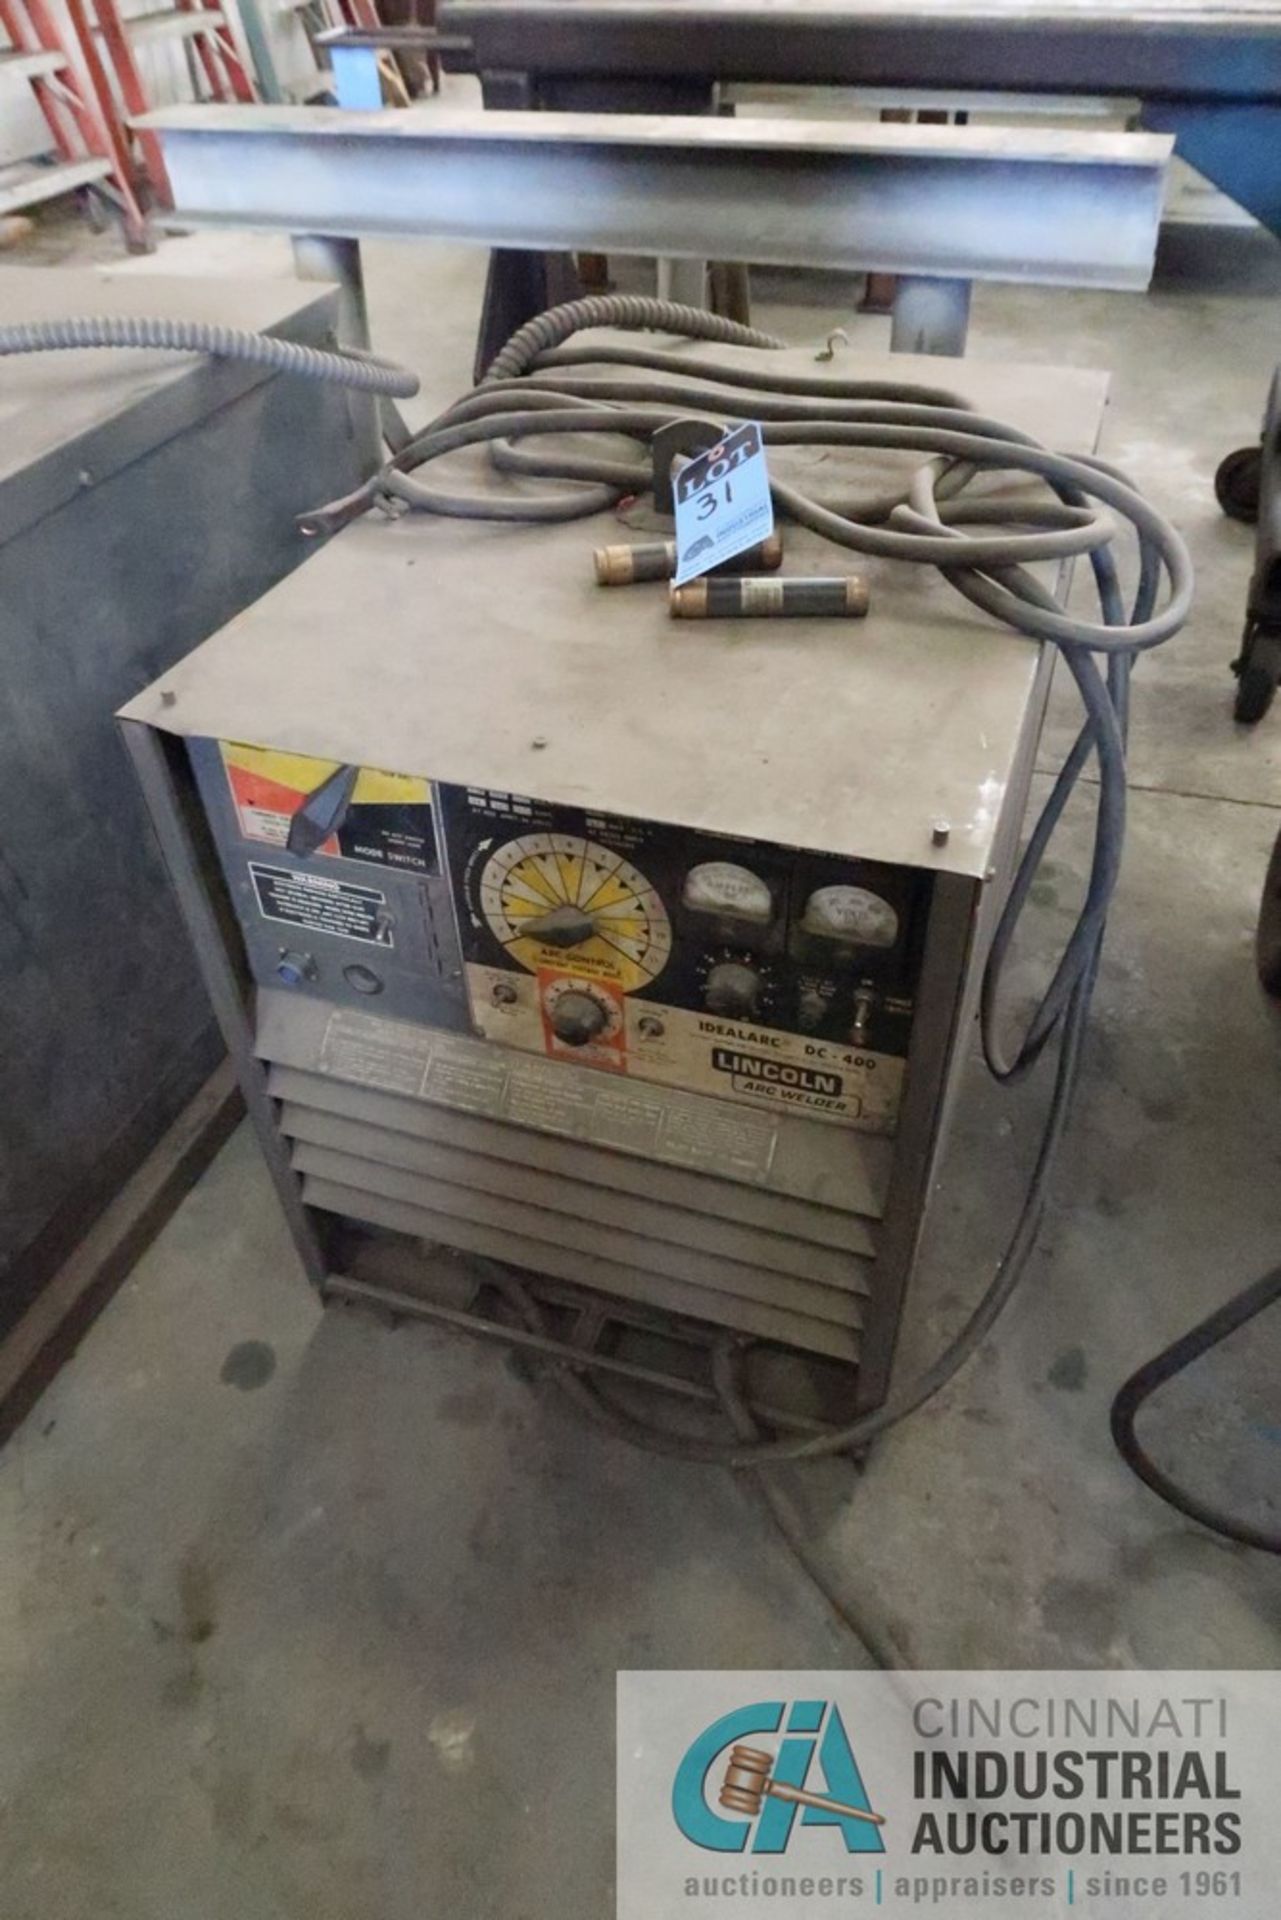 400 AMP LINCOLN ELECTRIC MODEL DC-400 ARC WELDING POWER SOURCE - Image 5 of 6